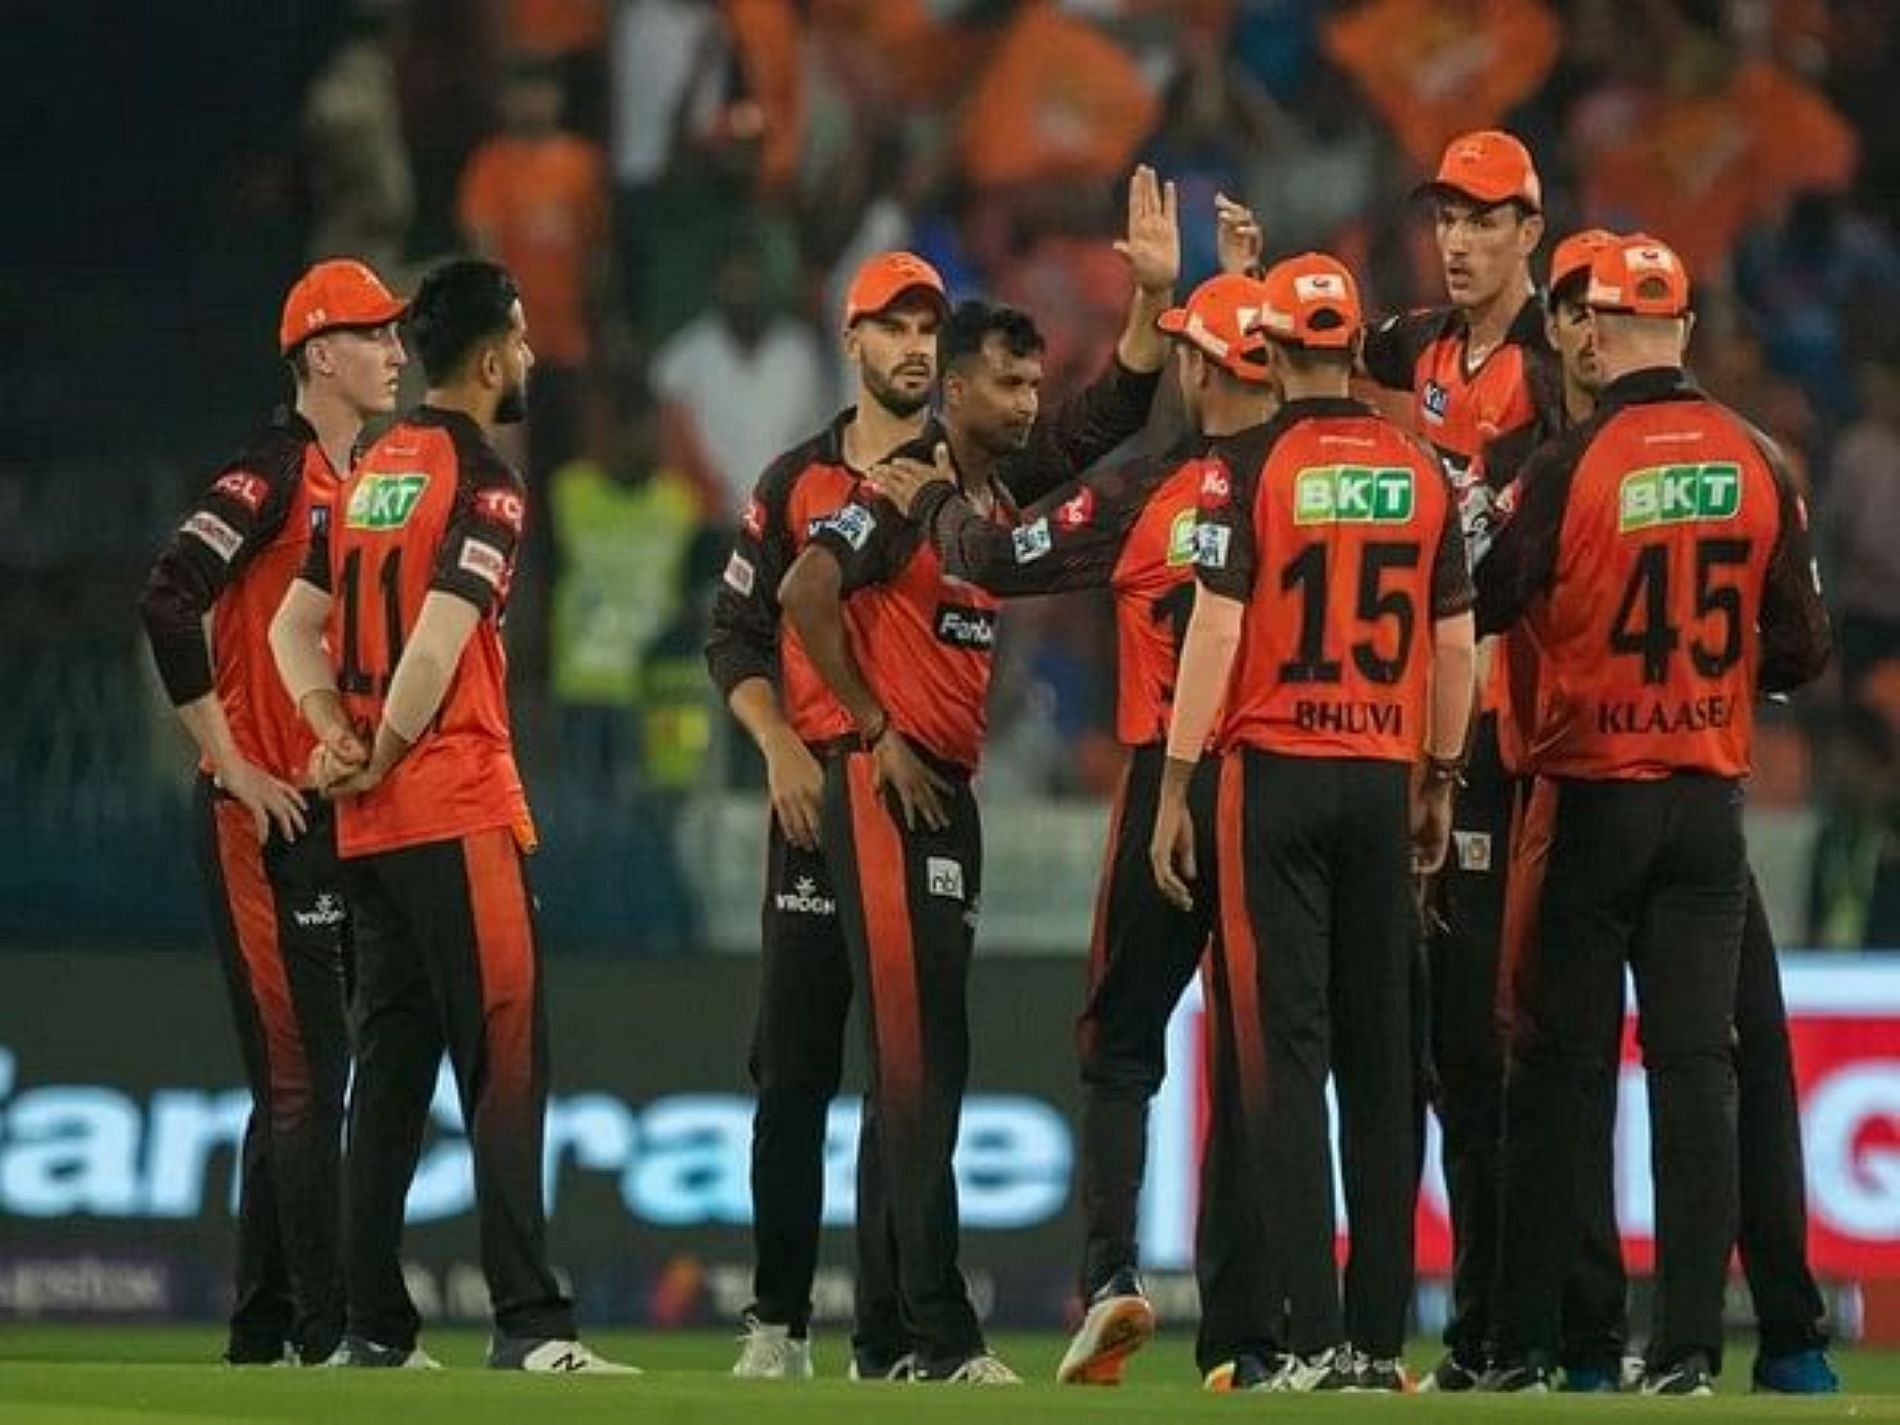 SRH are off to a slow start this season